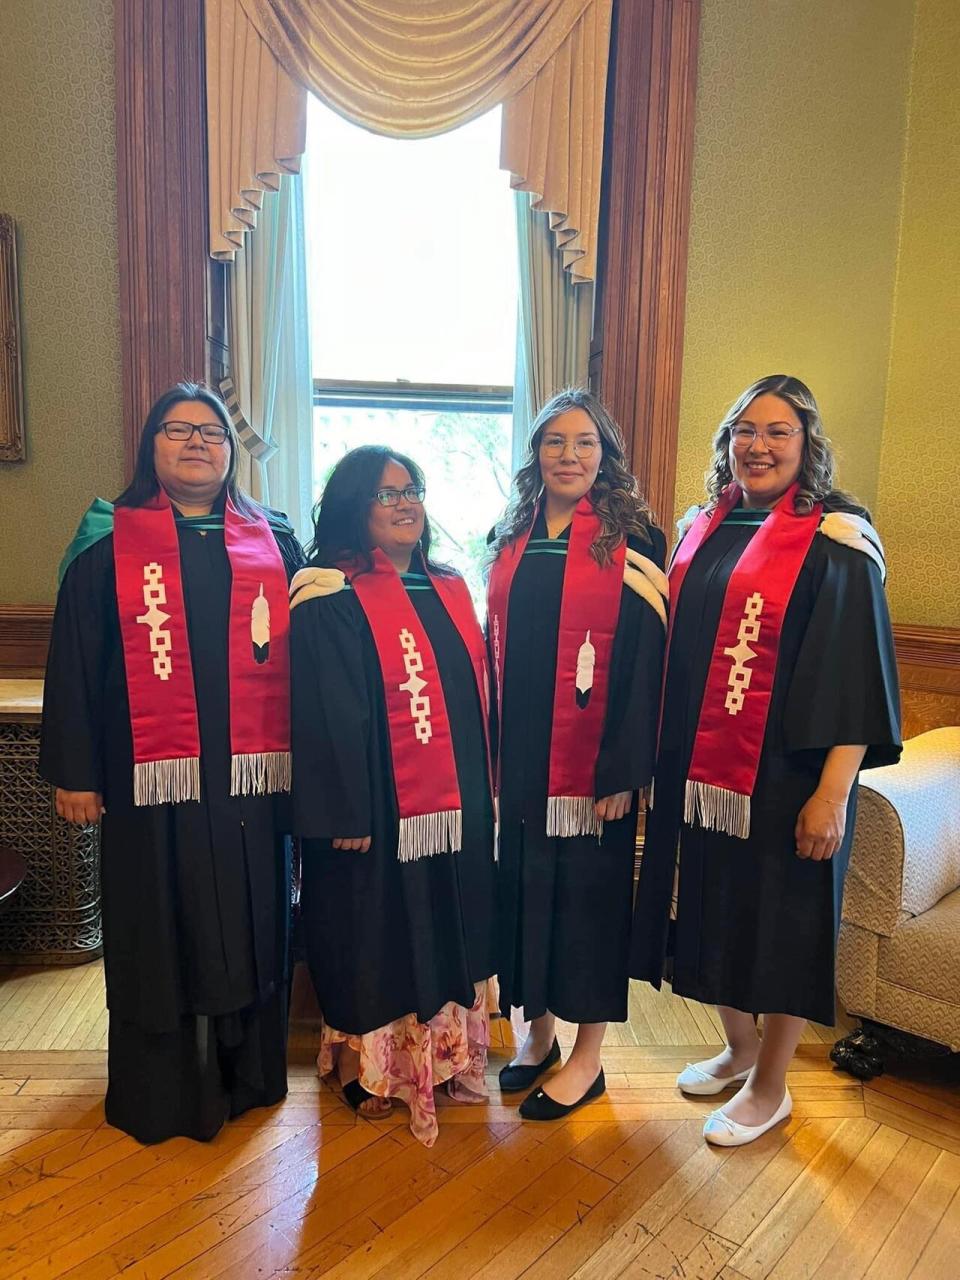 from left to right, Twyla Diamond, Constance Esau, Alexandra Katapatuk and Dylanna Hester are all from Waskaganish, QC. They will working as teachers in their home community.